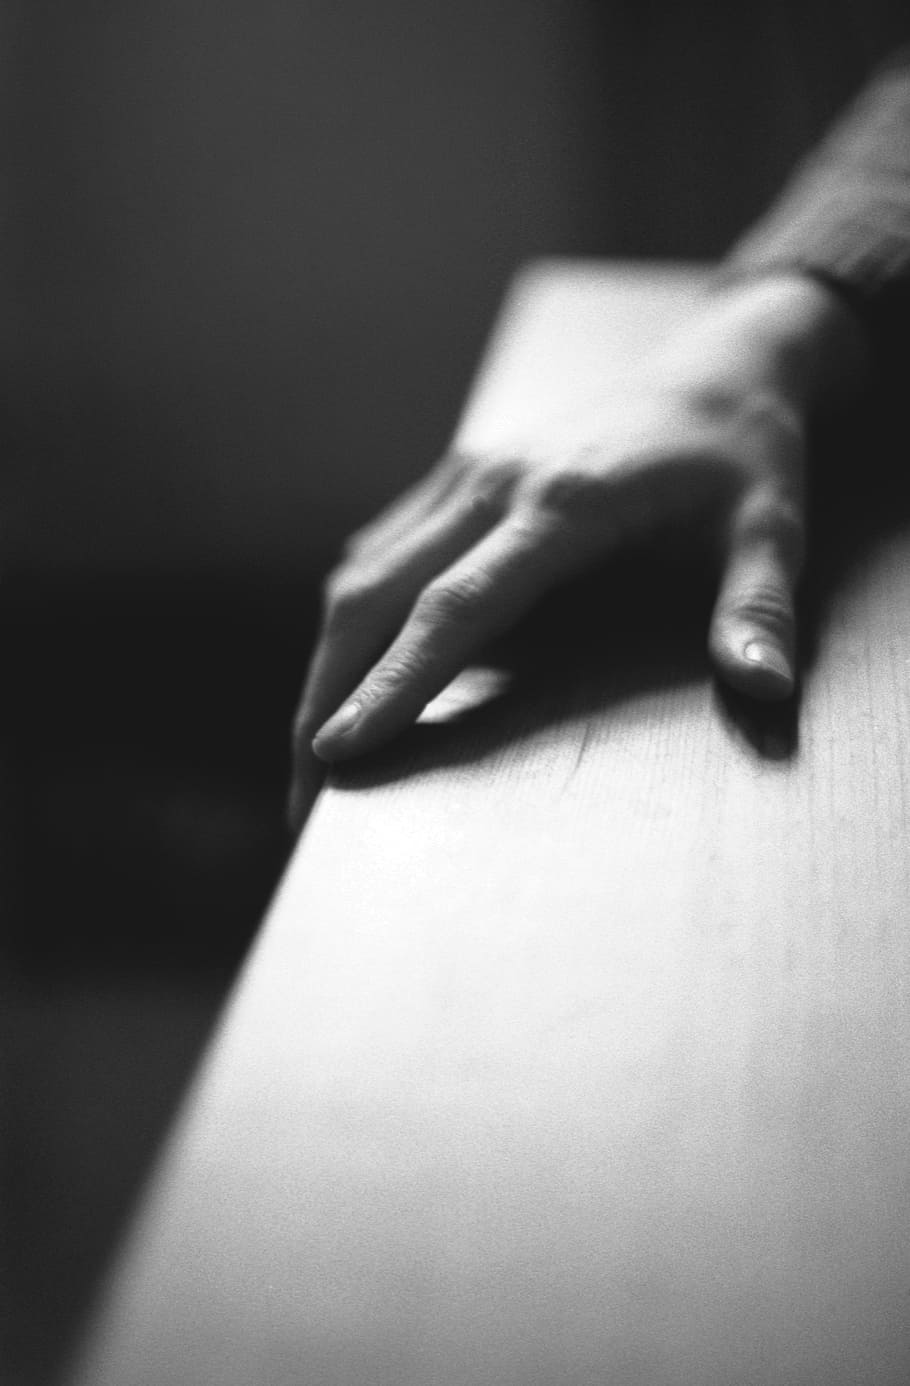 grayscale photo, person, hand, black and white, art, traditional, photography, arm, people, bodypart